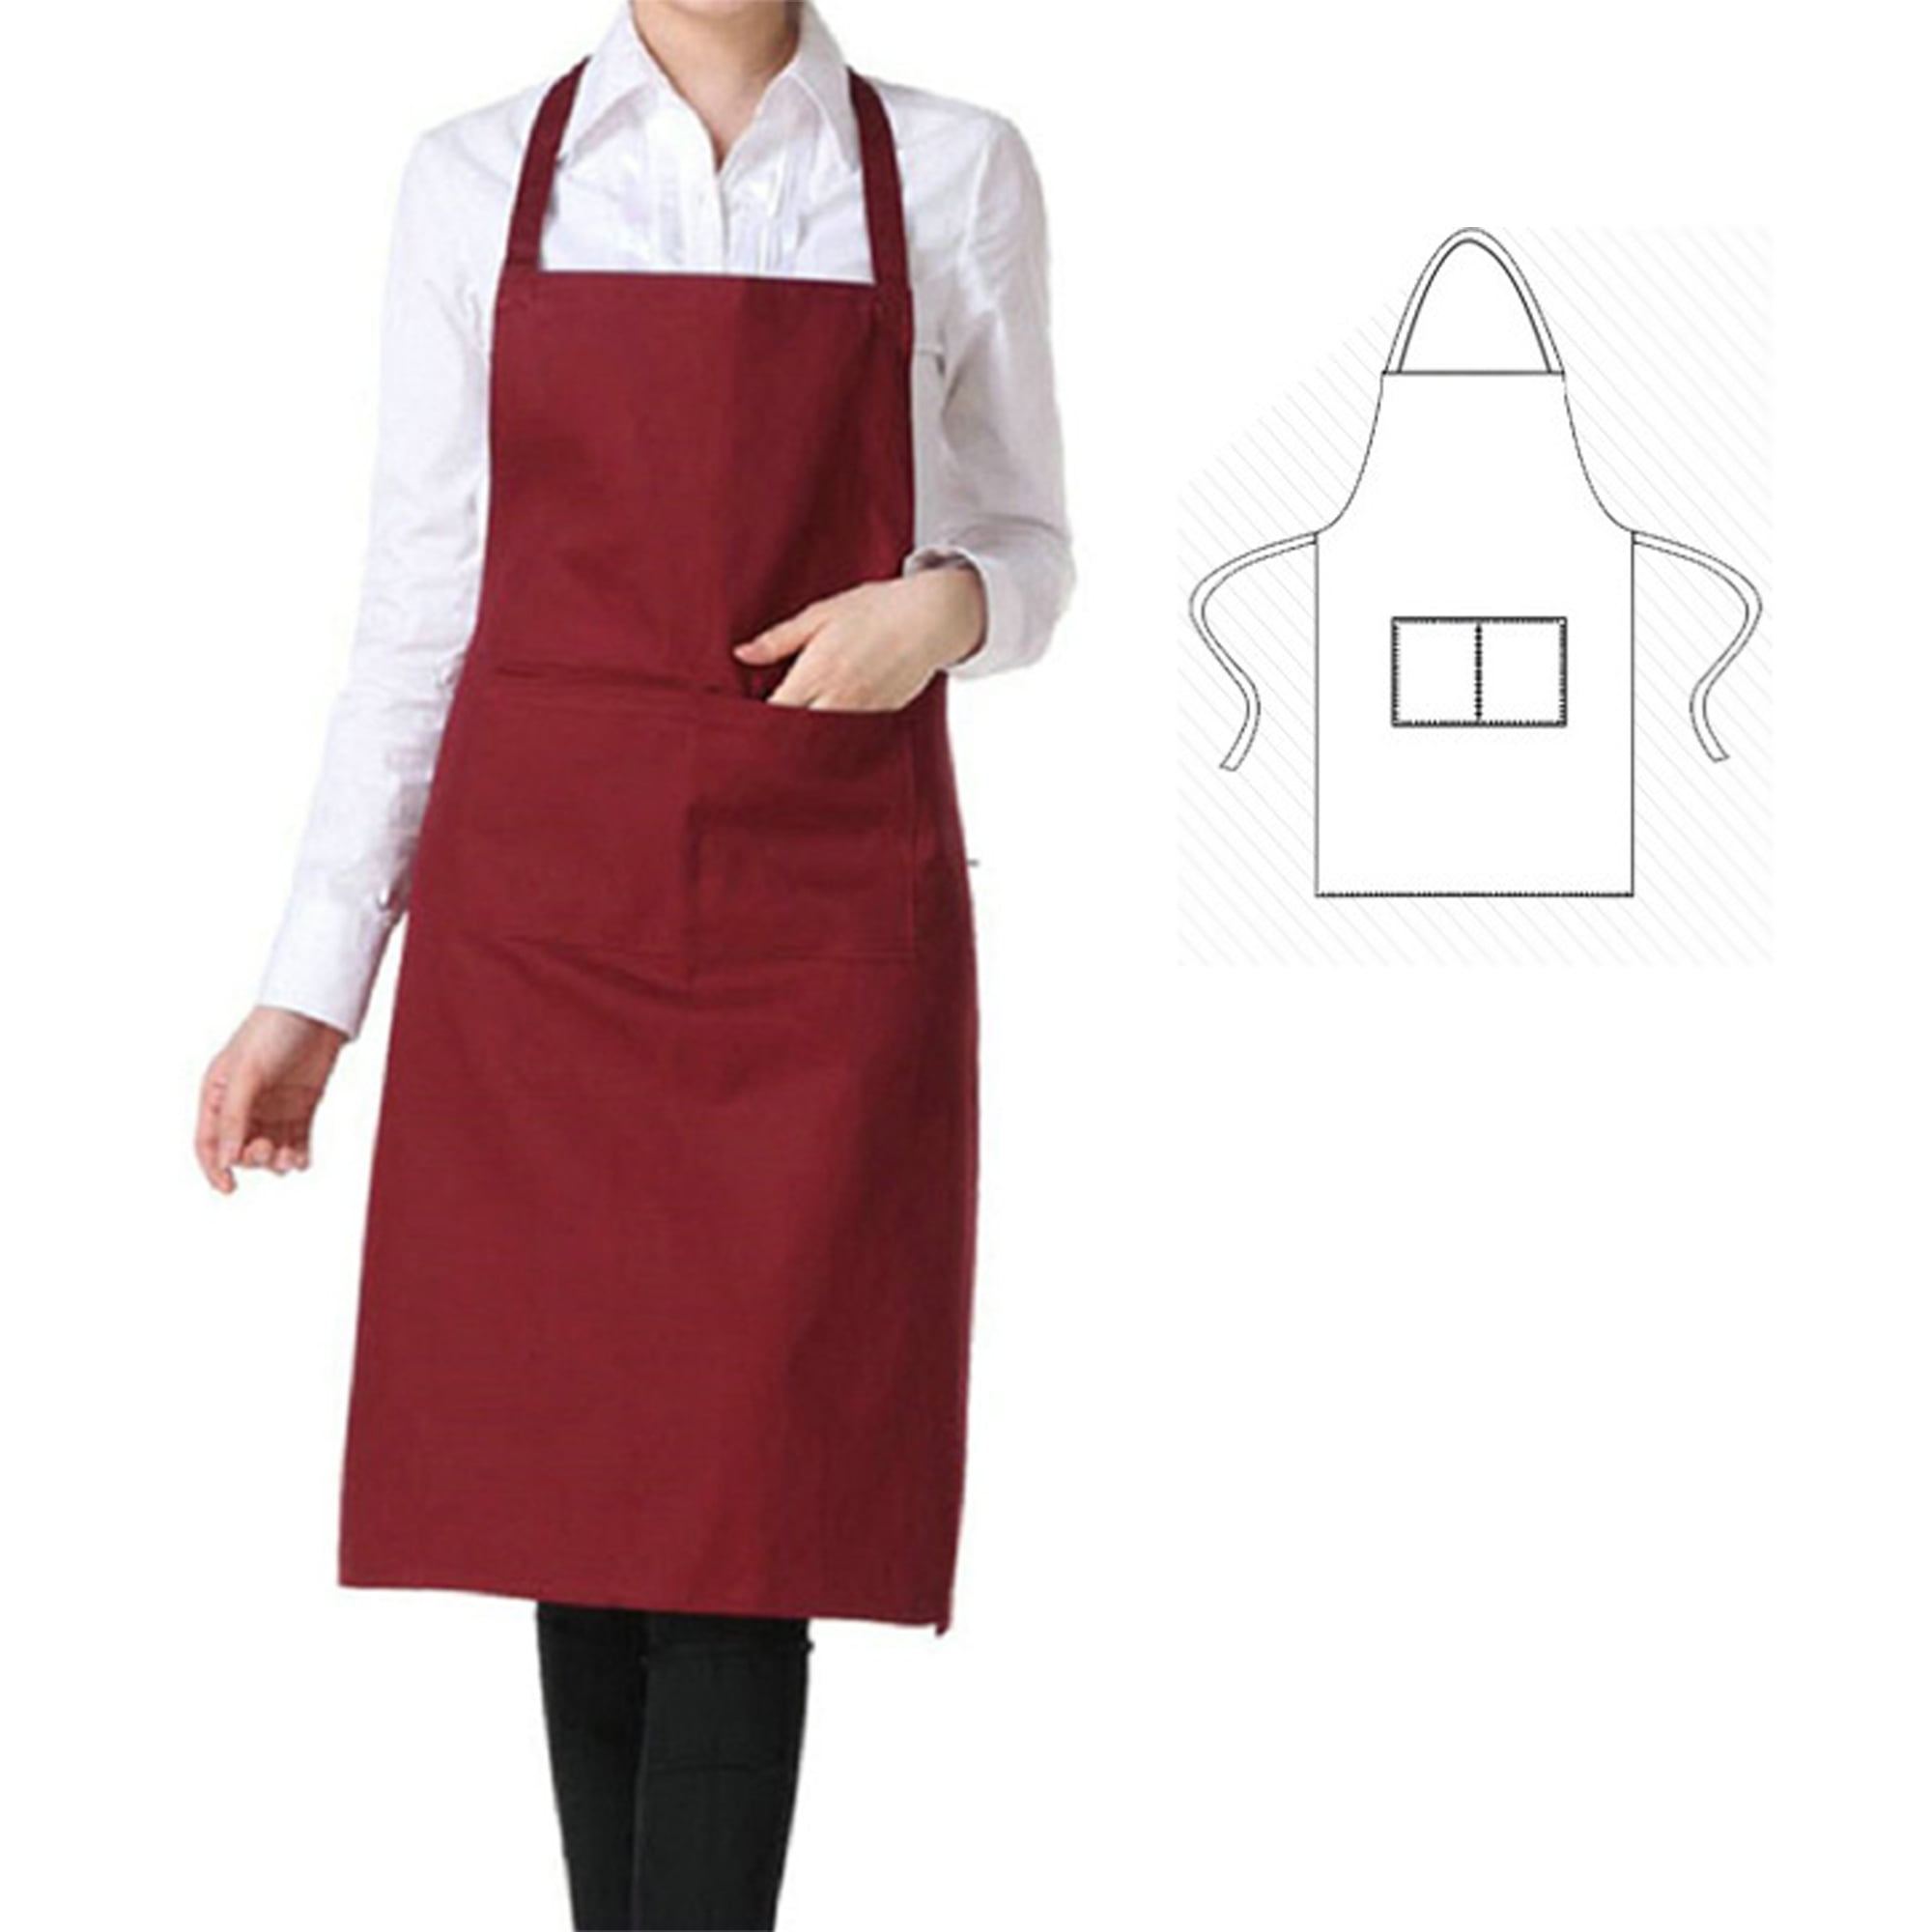 Restaurant Grill BBQ Commercial Home Kitchen Chef Cook Bib Black Red Navy Apron 